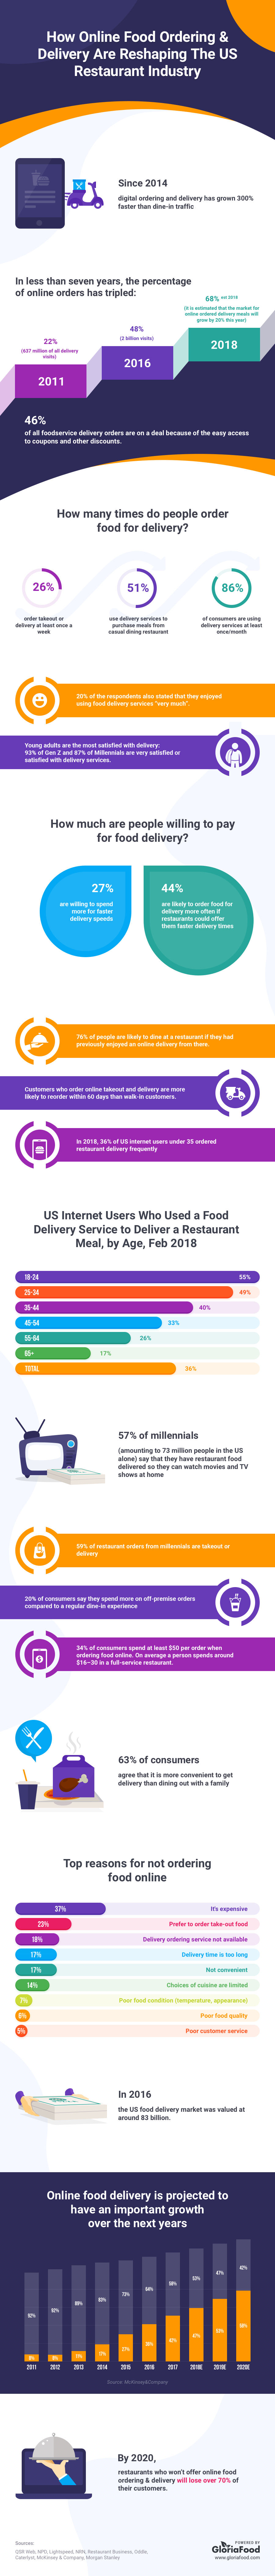 How Online Food Delivery Is Reshaping the Restaurant Industry